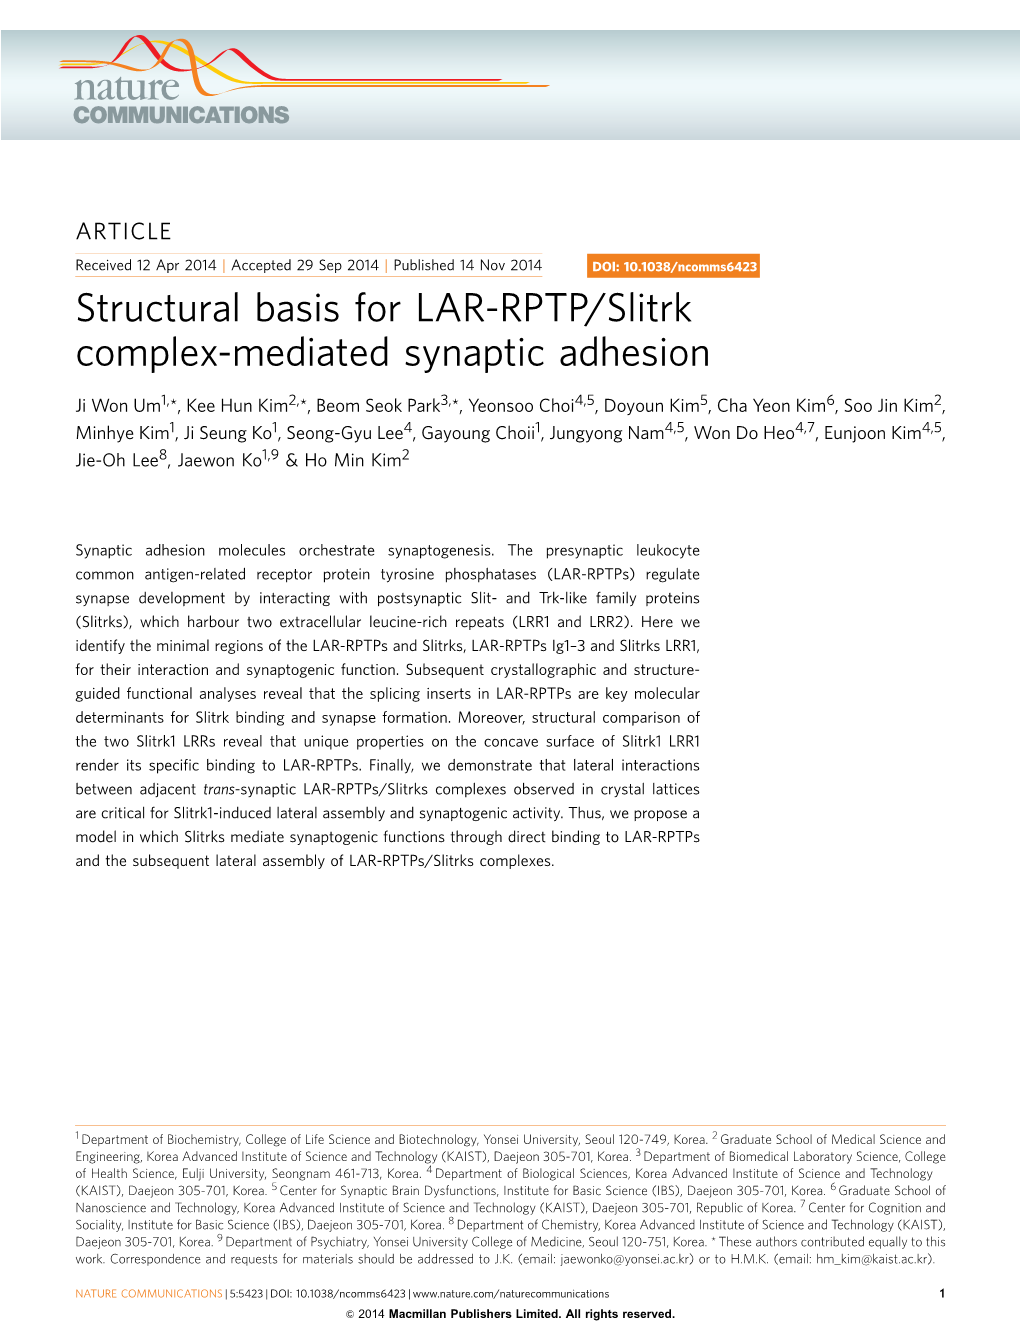 Structural Basis for LAR-RPTP/Slitrk Complex-Mediated Synaptic Adhesion